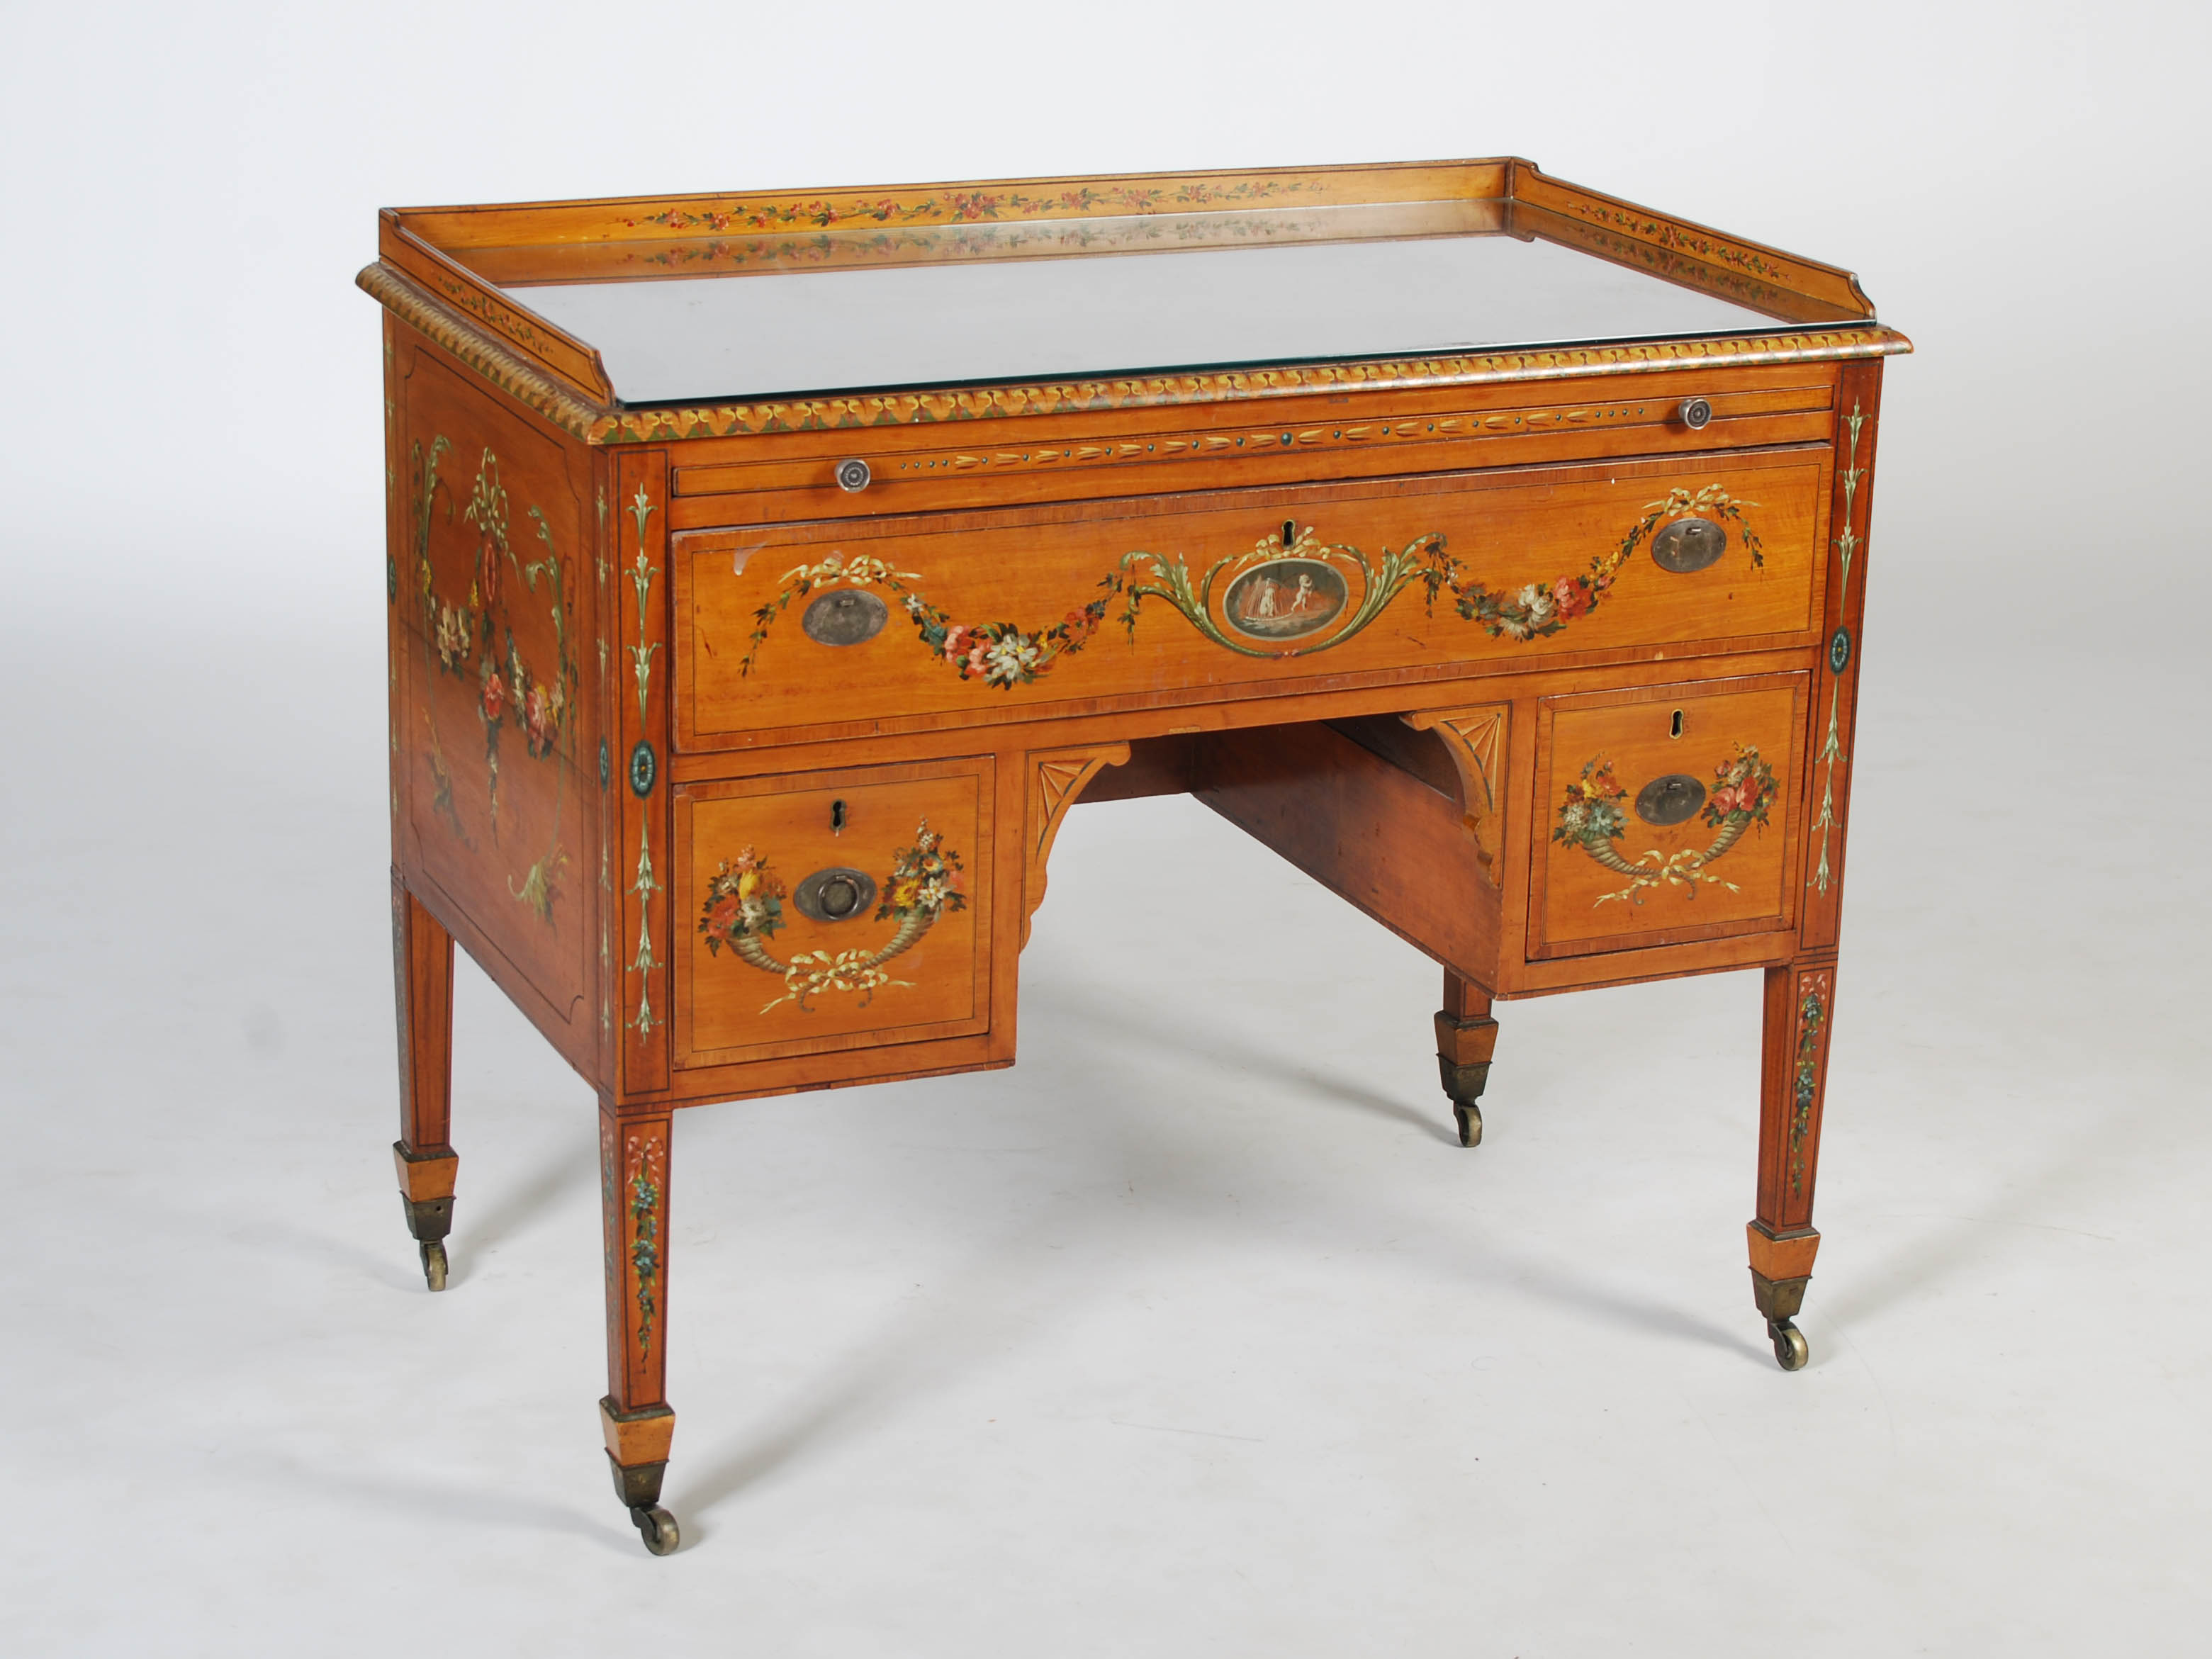 A 19th century painted satinwood wash stand, the rectangular top with three quarter gallery above